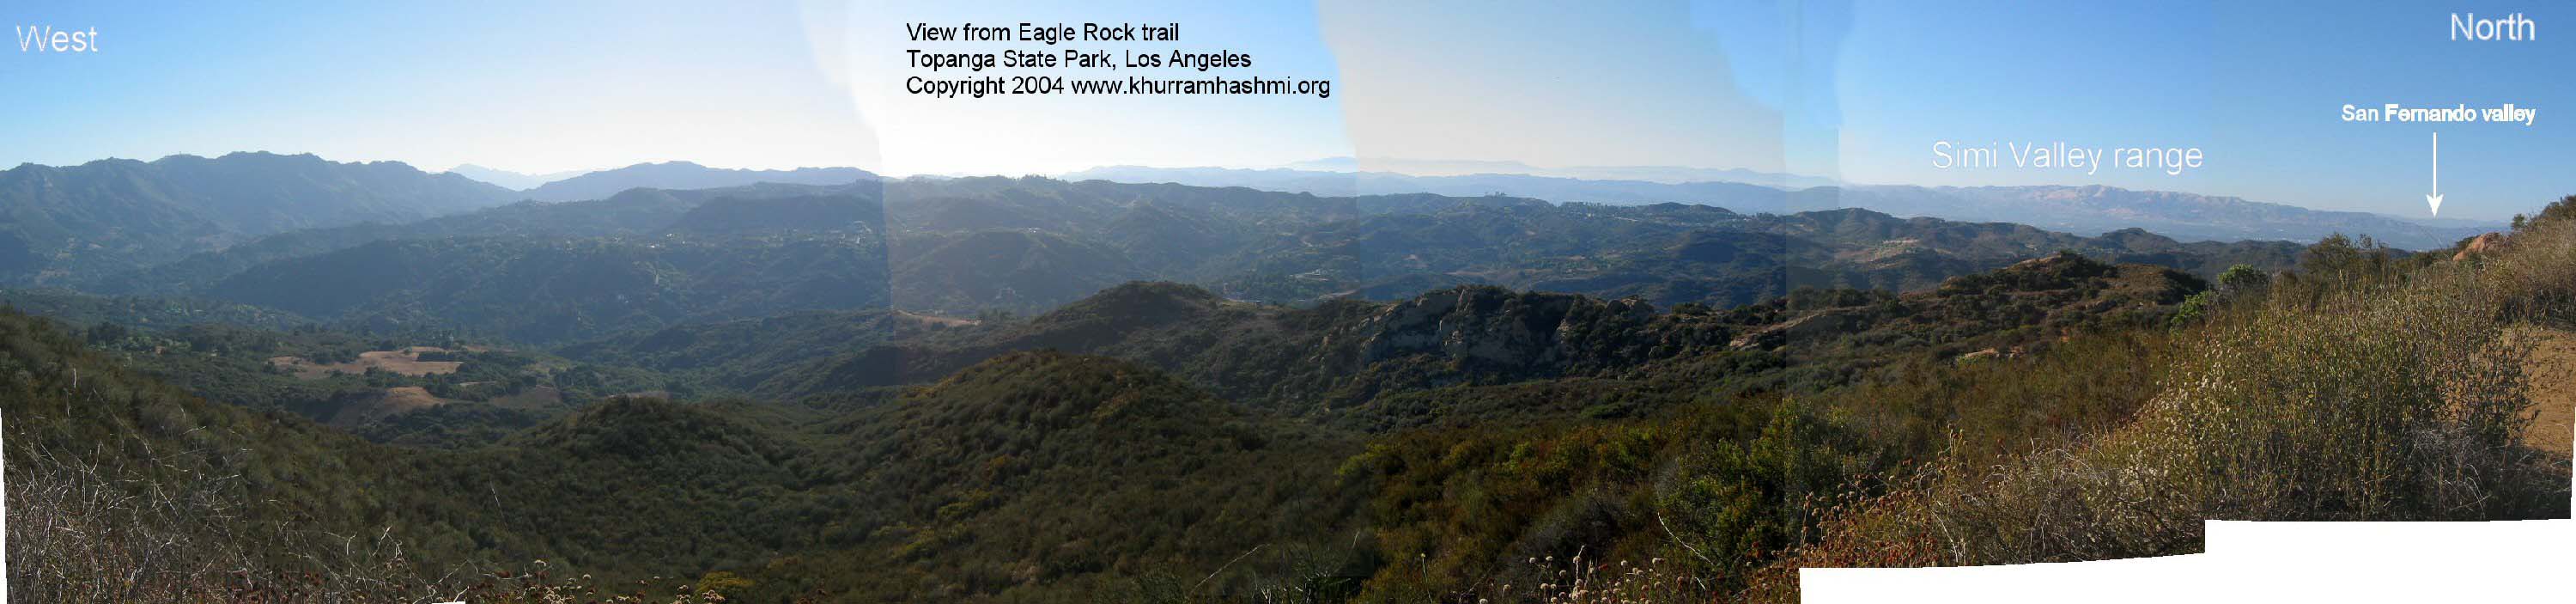 view from Eagle Rock trail, Topanga park, CA